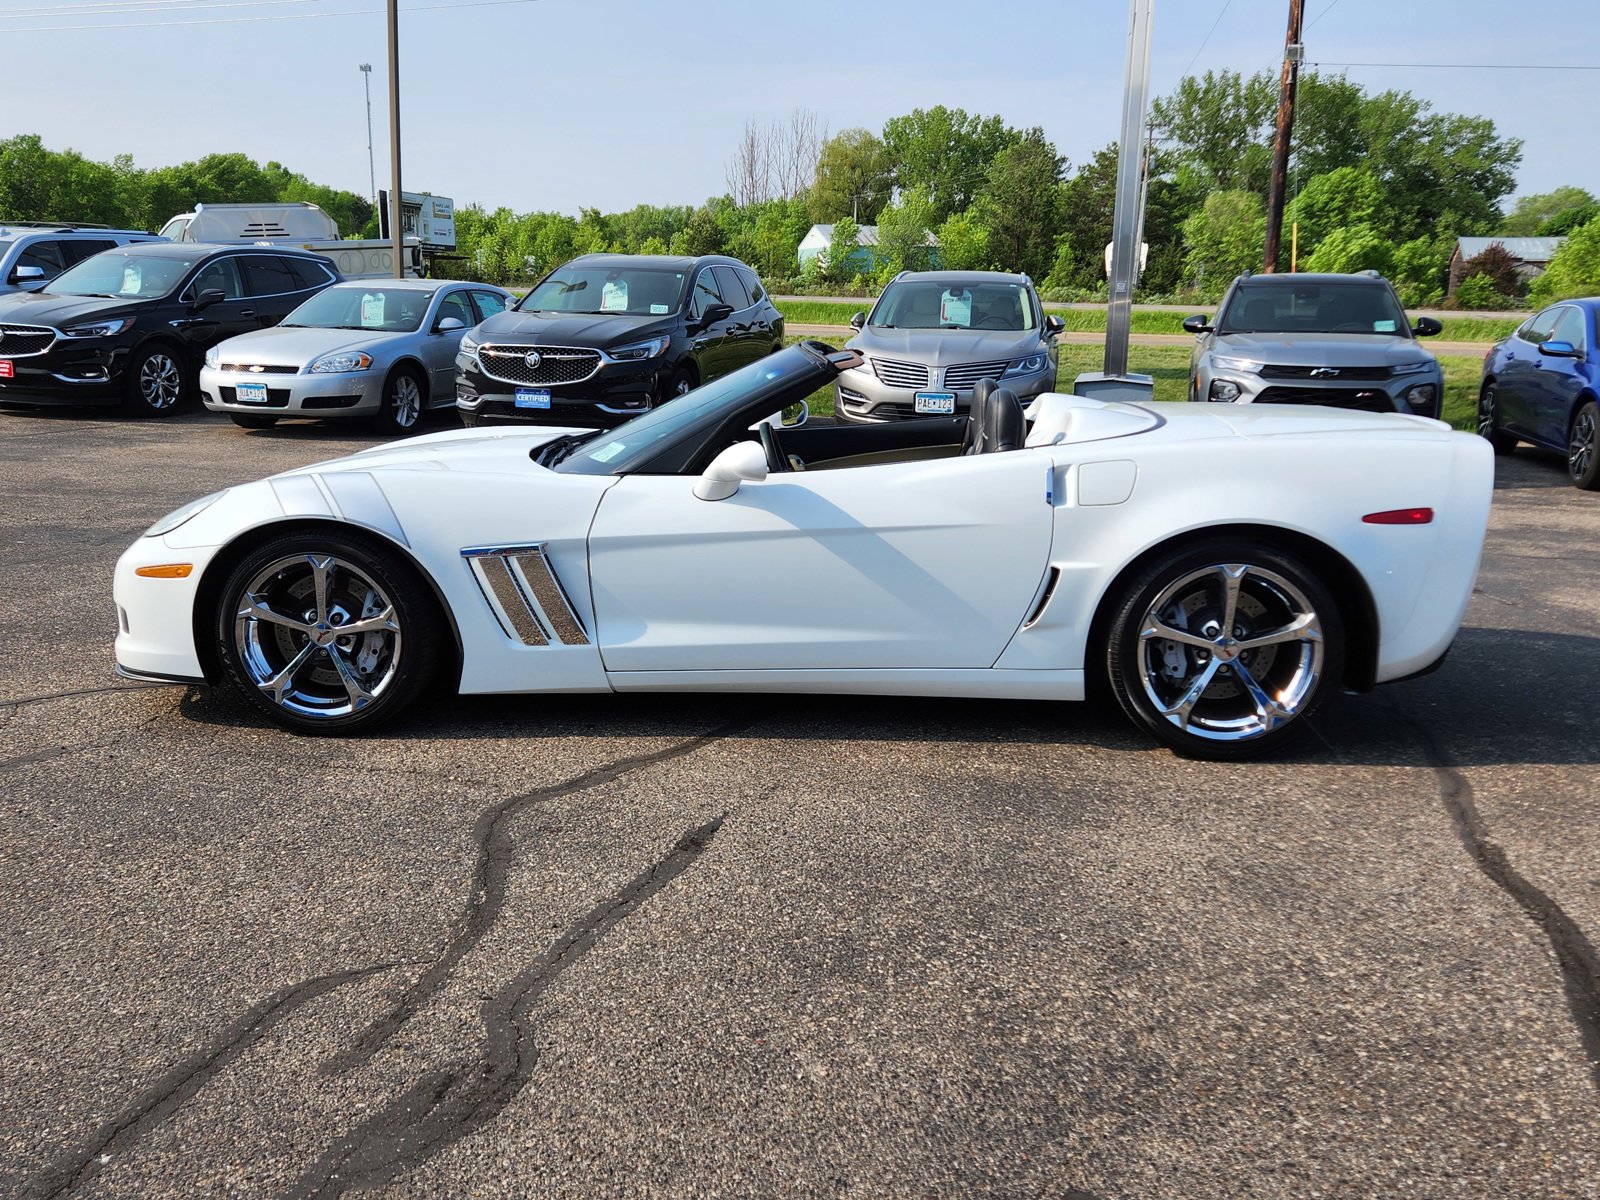 Used 2010 Chevrolet Corvette Grand Sport with VIN 1G1YW3DW1A5108190 for sale in Annandale, Minnesota